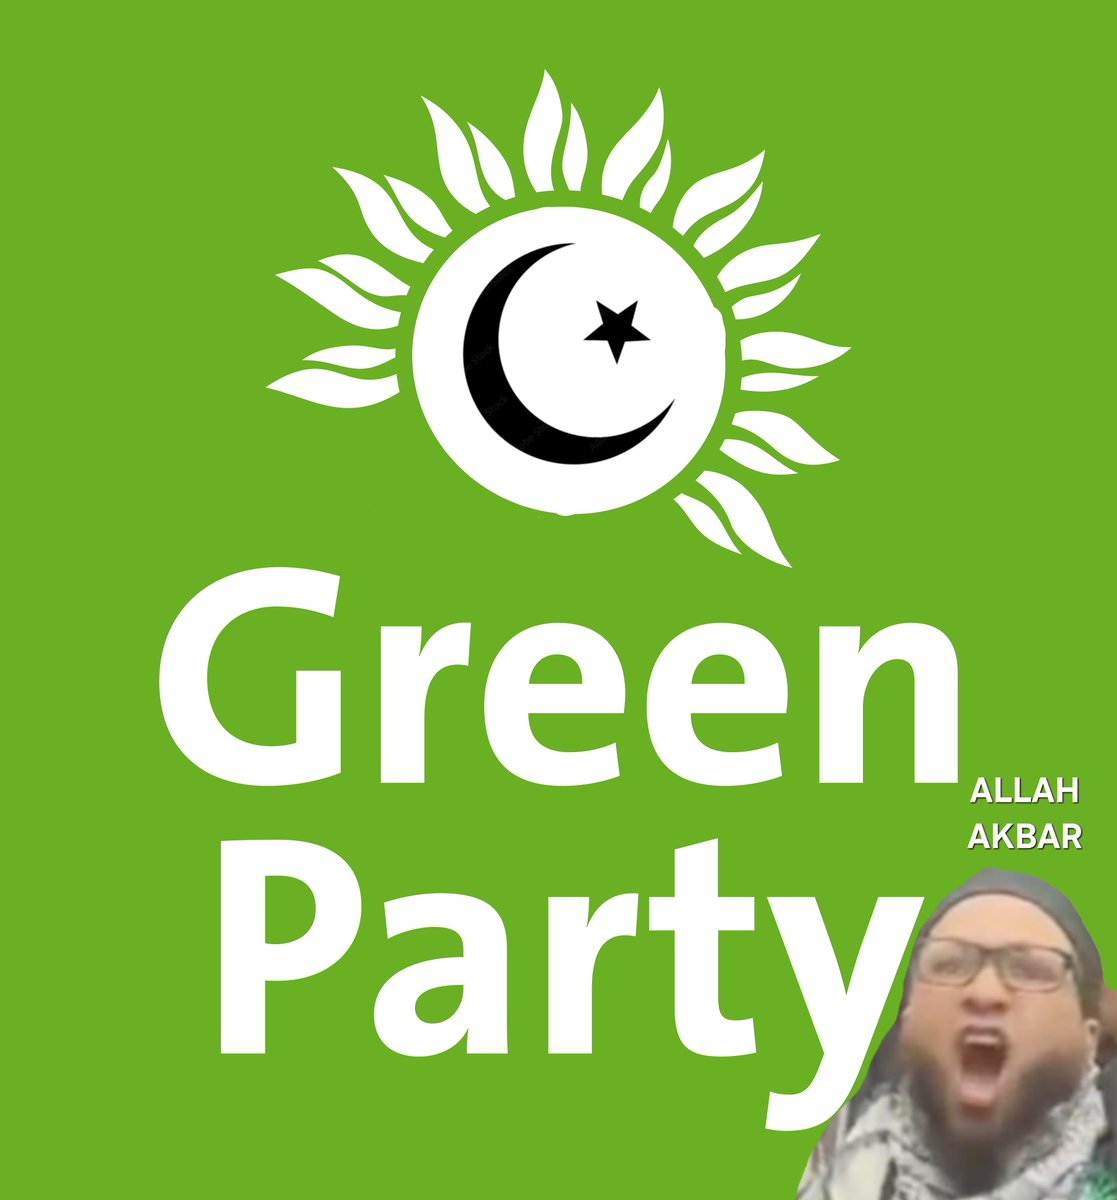 No surprise since the green party is an far left terrorist party and now it's allied with Islamic terrorists within the uk to destroy the west We don't want sharia or Islamic fanatics DICTATING US F**K OFF